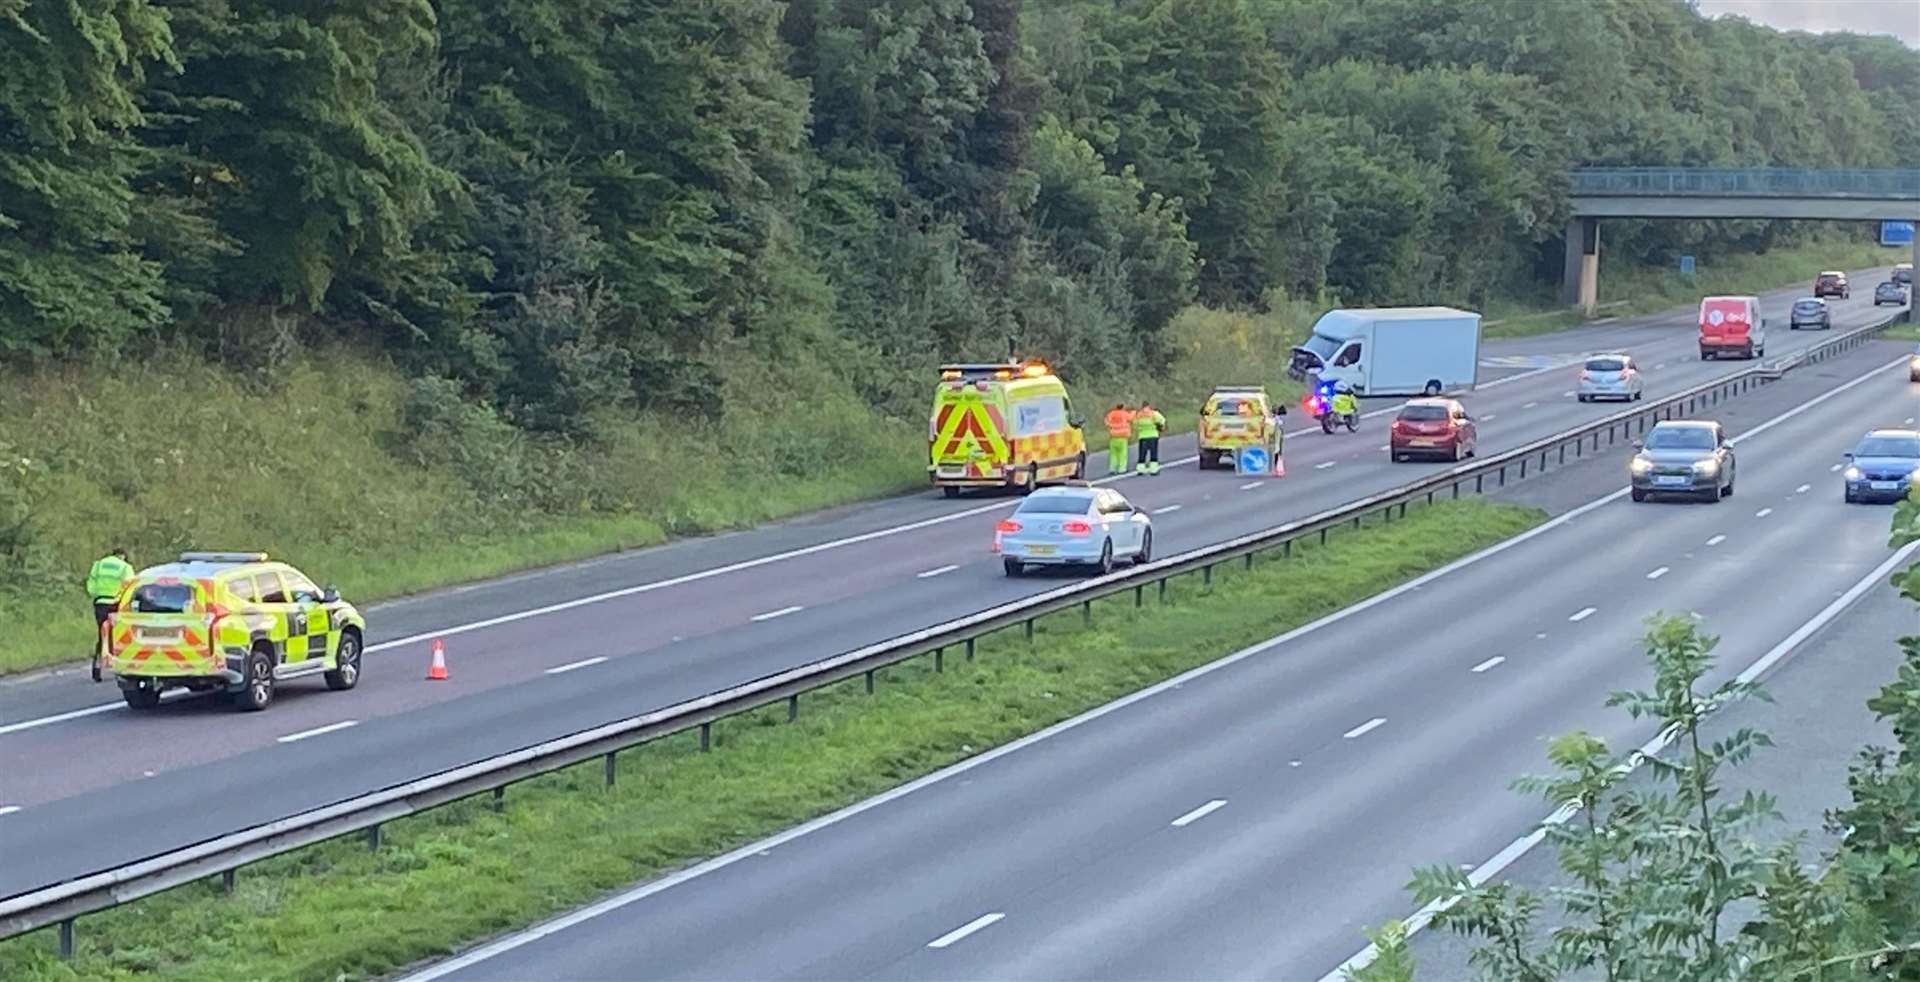 The van left the carriageway and ended up in some undergrowth. Picture Samuel Bate